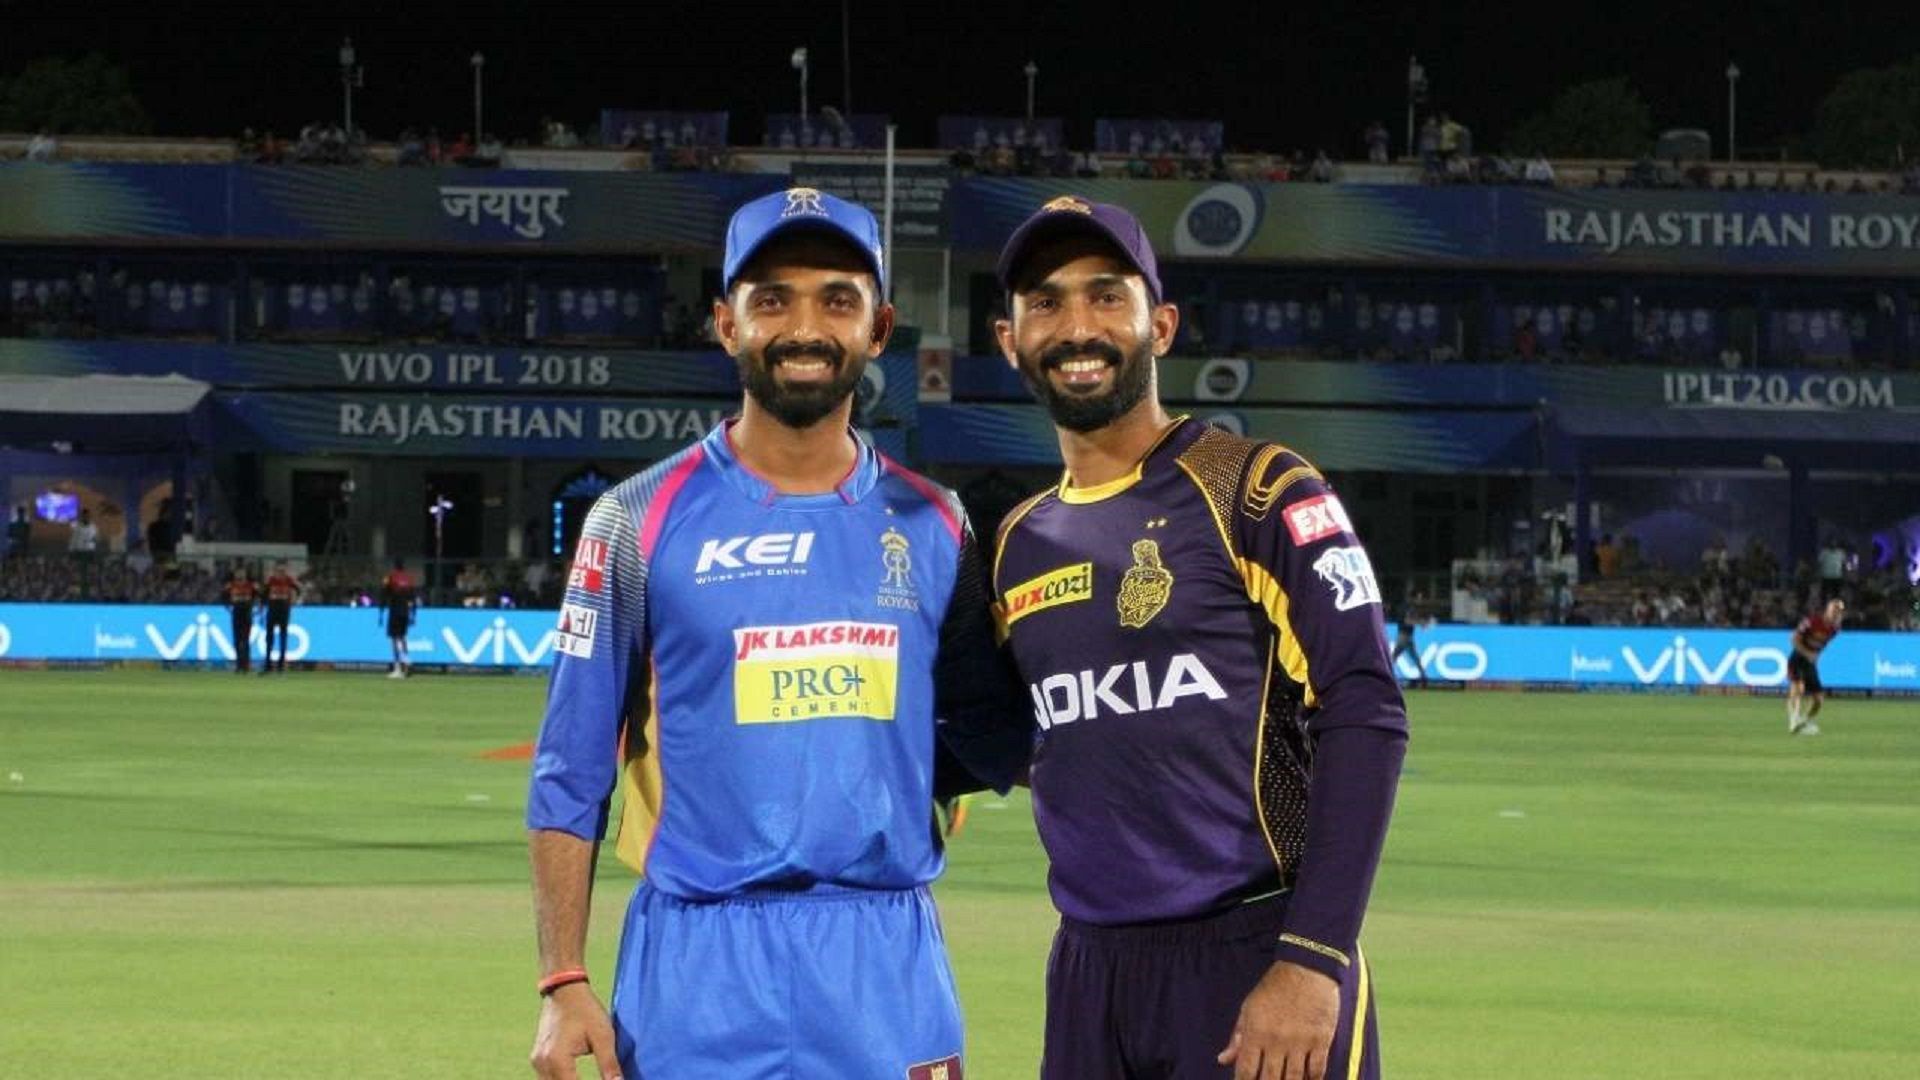 KKR can look at Rahane as a potential captaincy pick